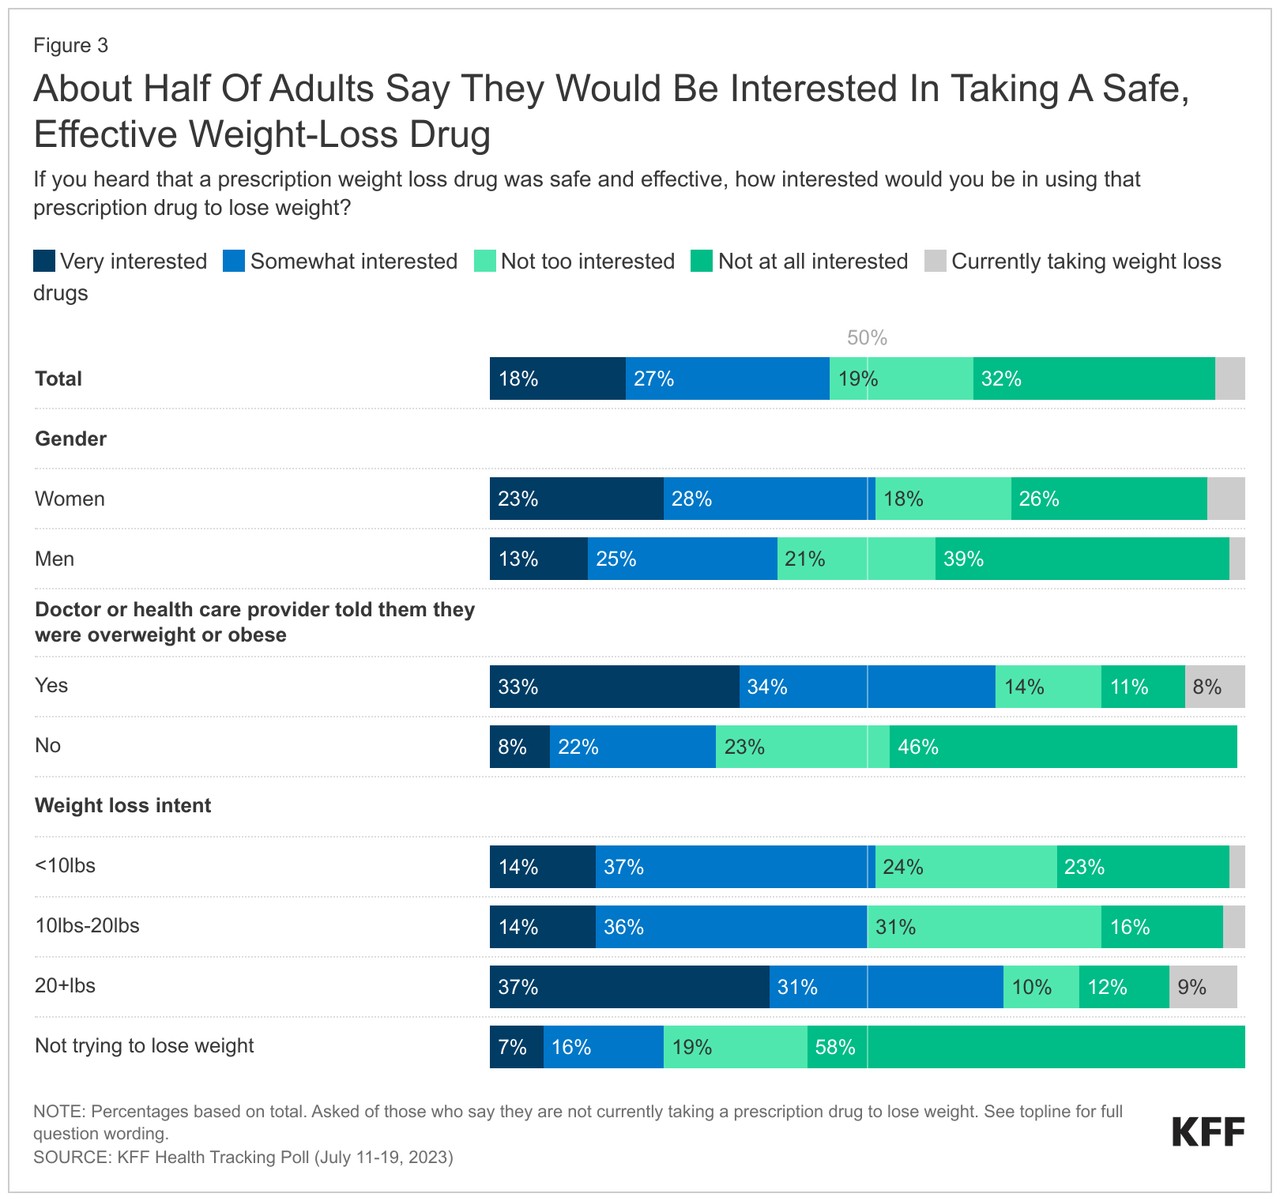 676b094eca4f1b0c176d05f748154670_saupload_3about-half-of-adults-say-they-would-be-interested-in-taking-a-safe-effective-weight-loss-drug_thumb1.png